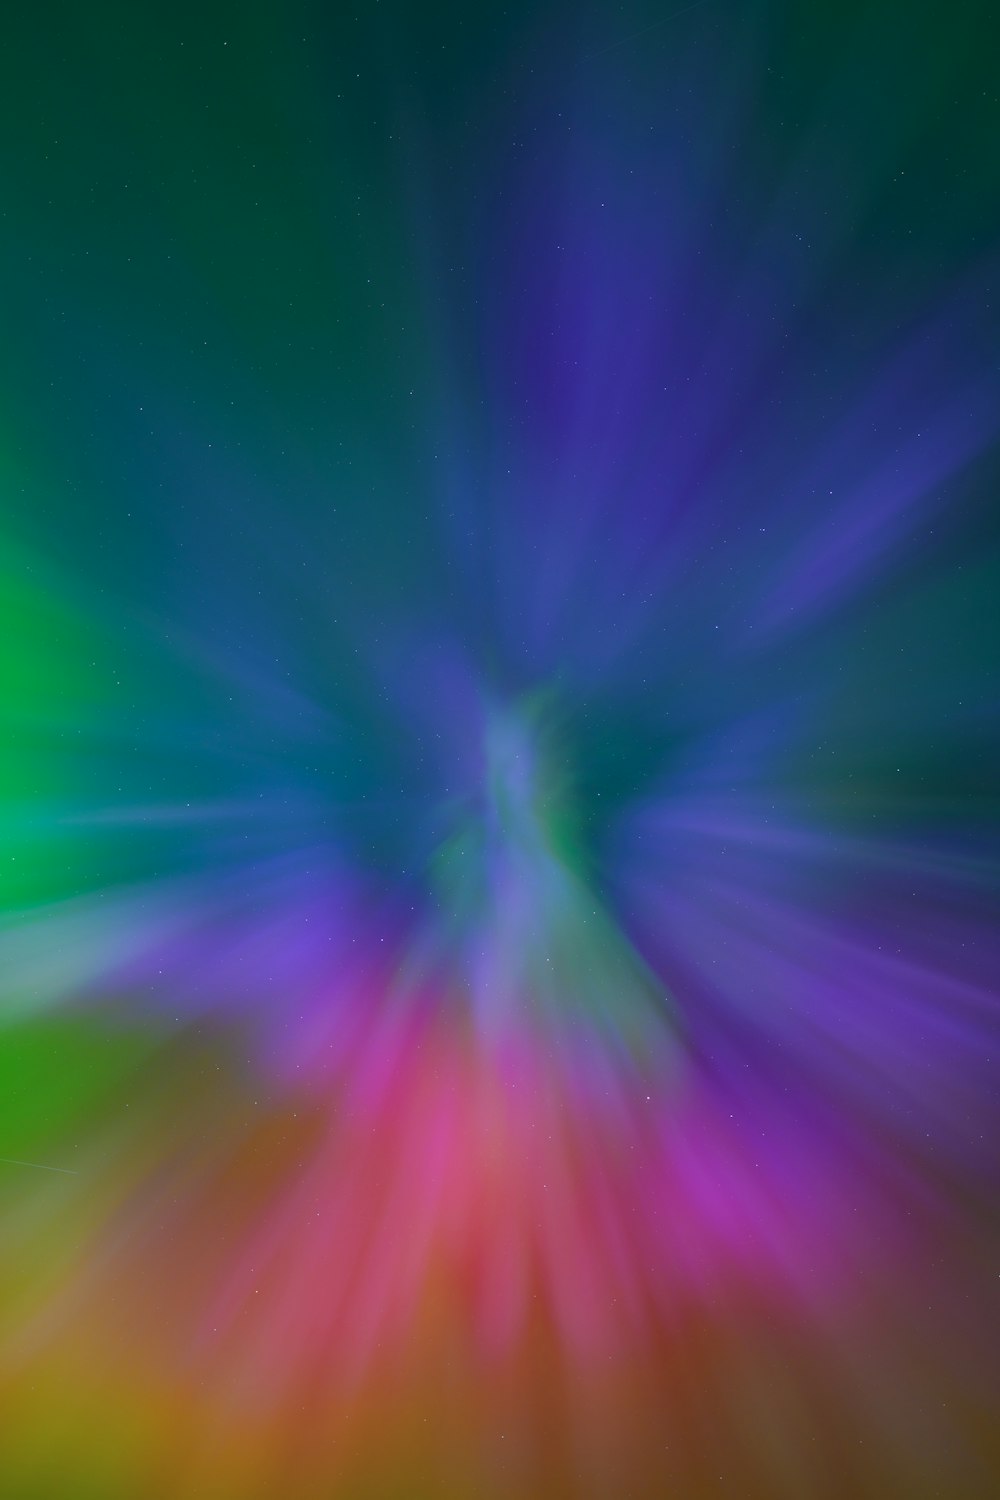 a blurry image of a green and purple background